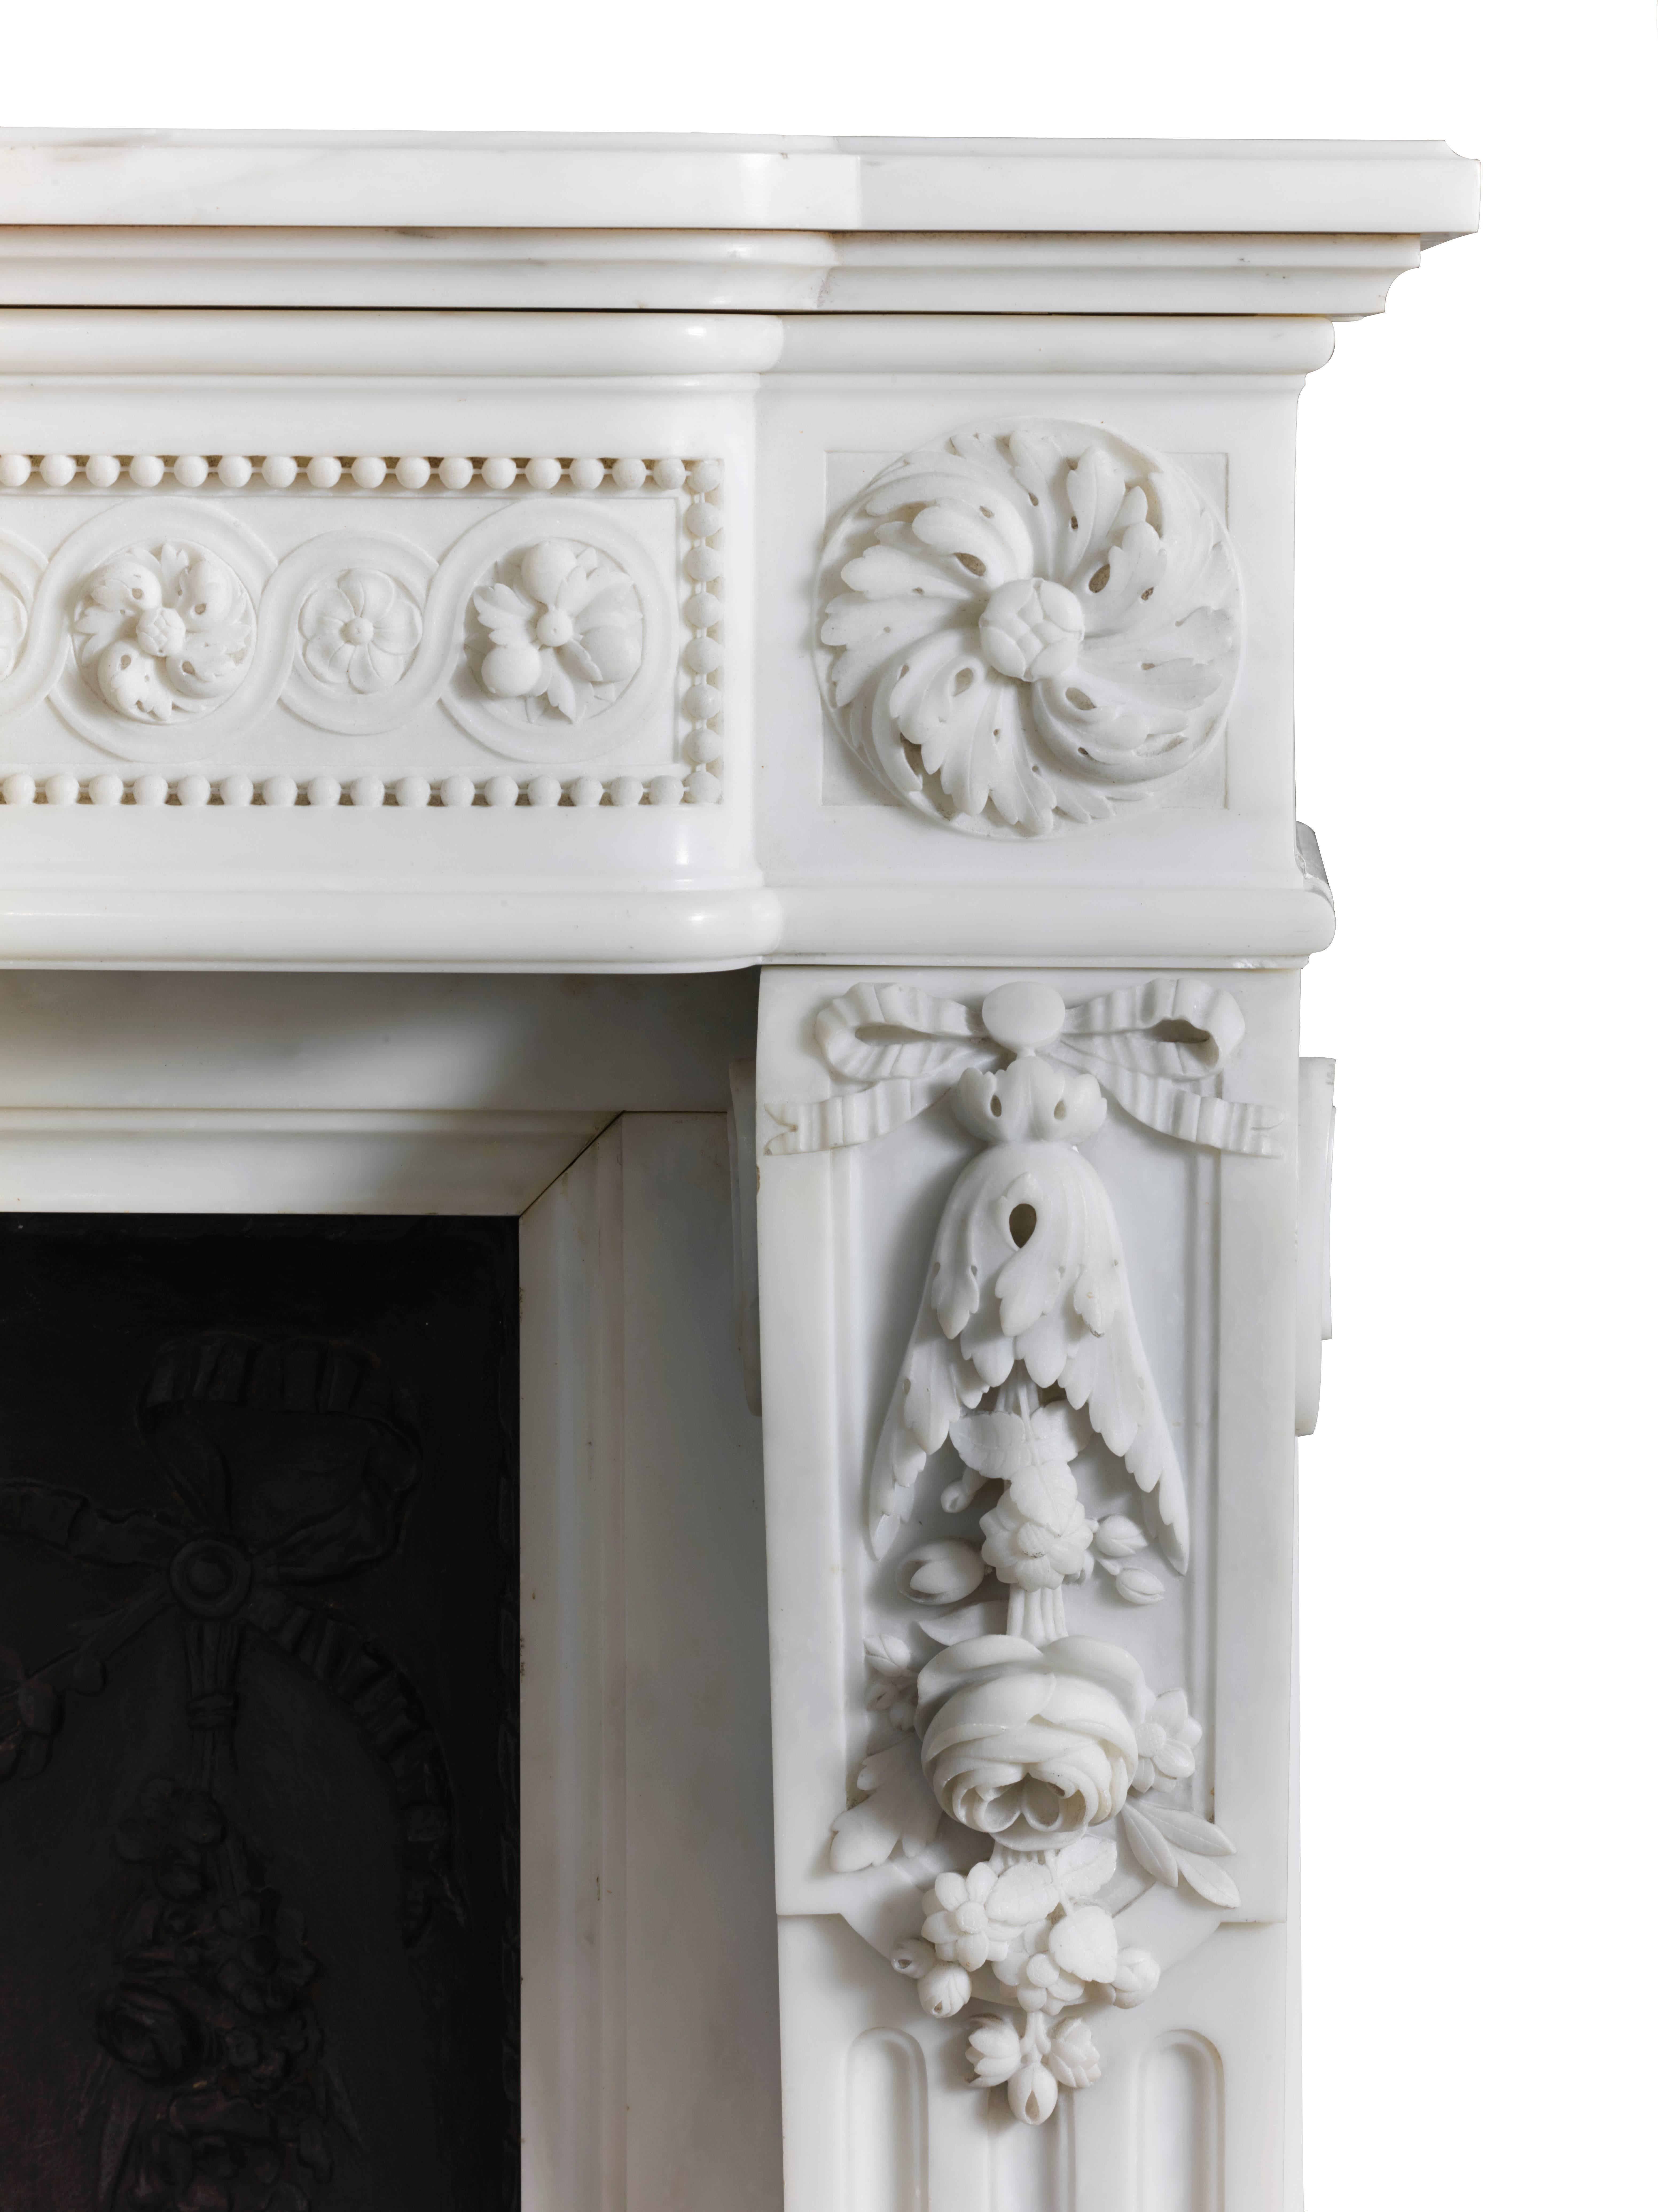 An impressive white marble Louis XVI mantel of inverted breakfront design with a beaded floral guilloche frieze and tied ribbon floral swag centre tablet, supported by tied ribbon floral console jambs with honeysuckle flutes surmounted by concentric